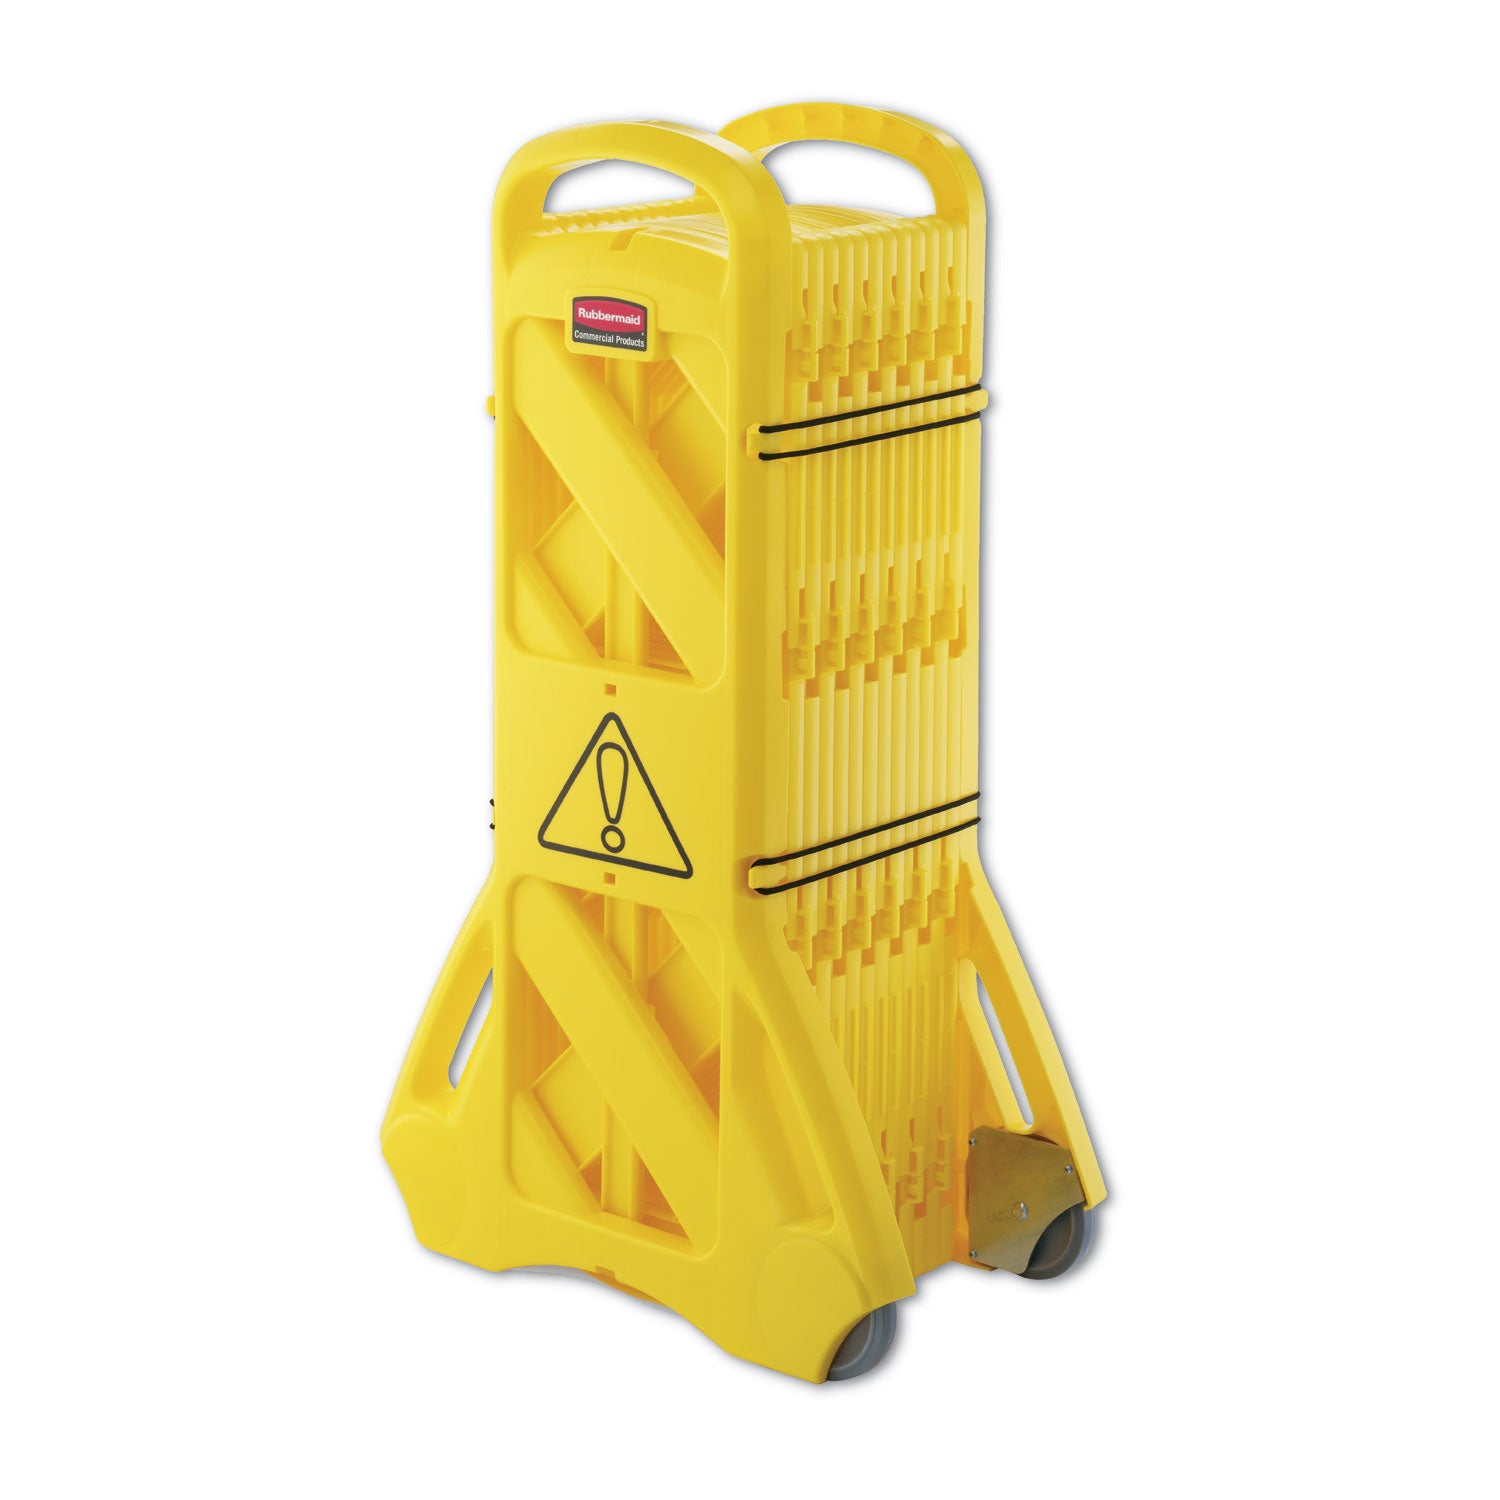 Portable Mobile Safety Barrier, Plastic, 13 ft x 40", Yellow - 